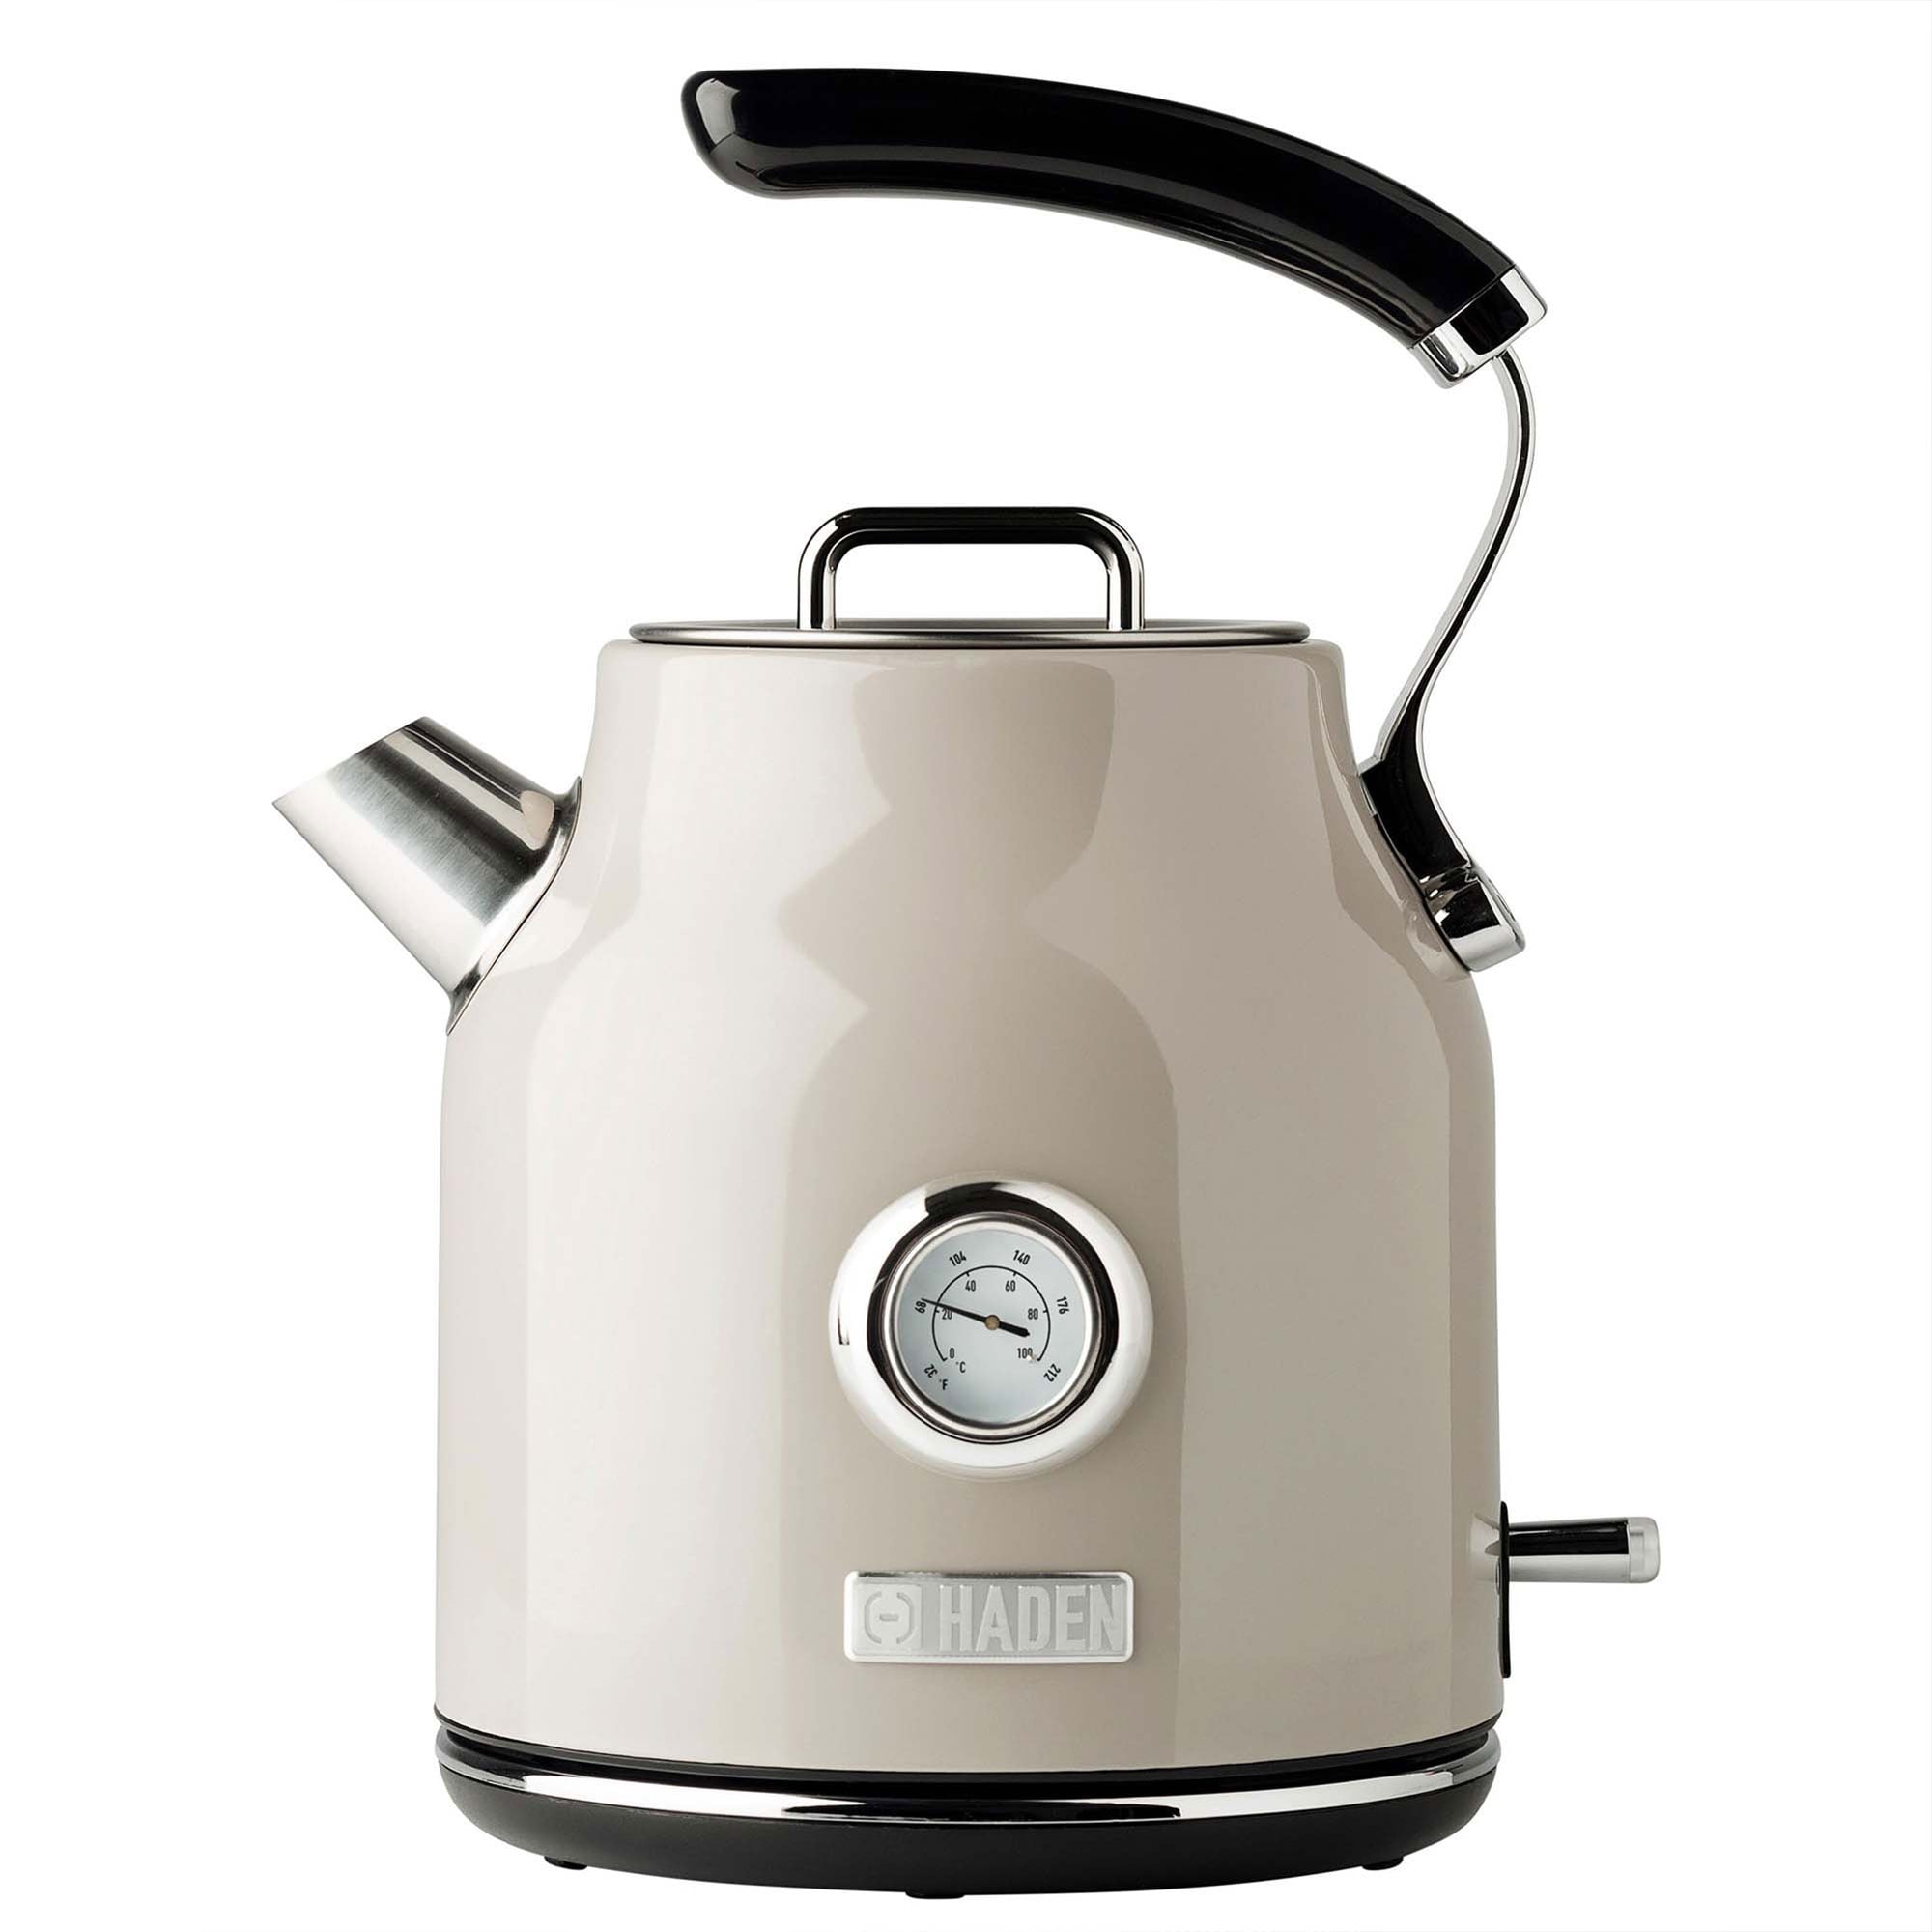 https://ak1.ostkcdn.com/images/products/is/images/direct/7fa0034c1c338e55a2187f132dd321e1d02bf3c0/Haden-Dorset-1.7-Liter-Stainless-Steel-Electric-Kettle-with-Auto-Shut-Off%2C-Putty.jpg